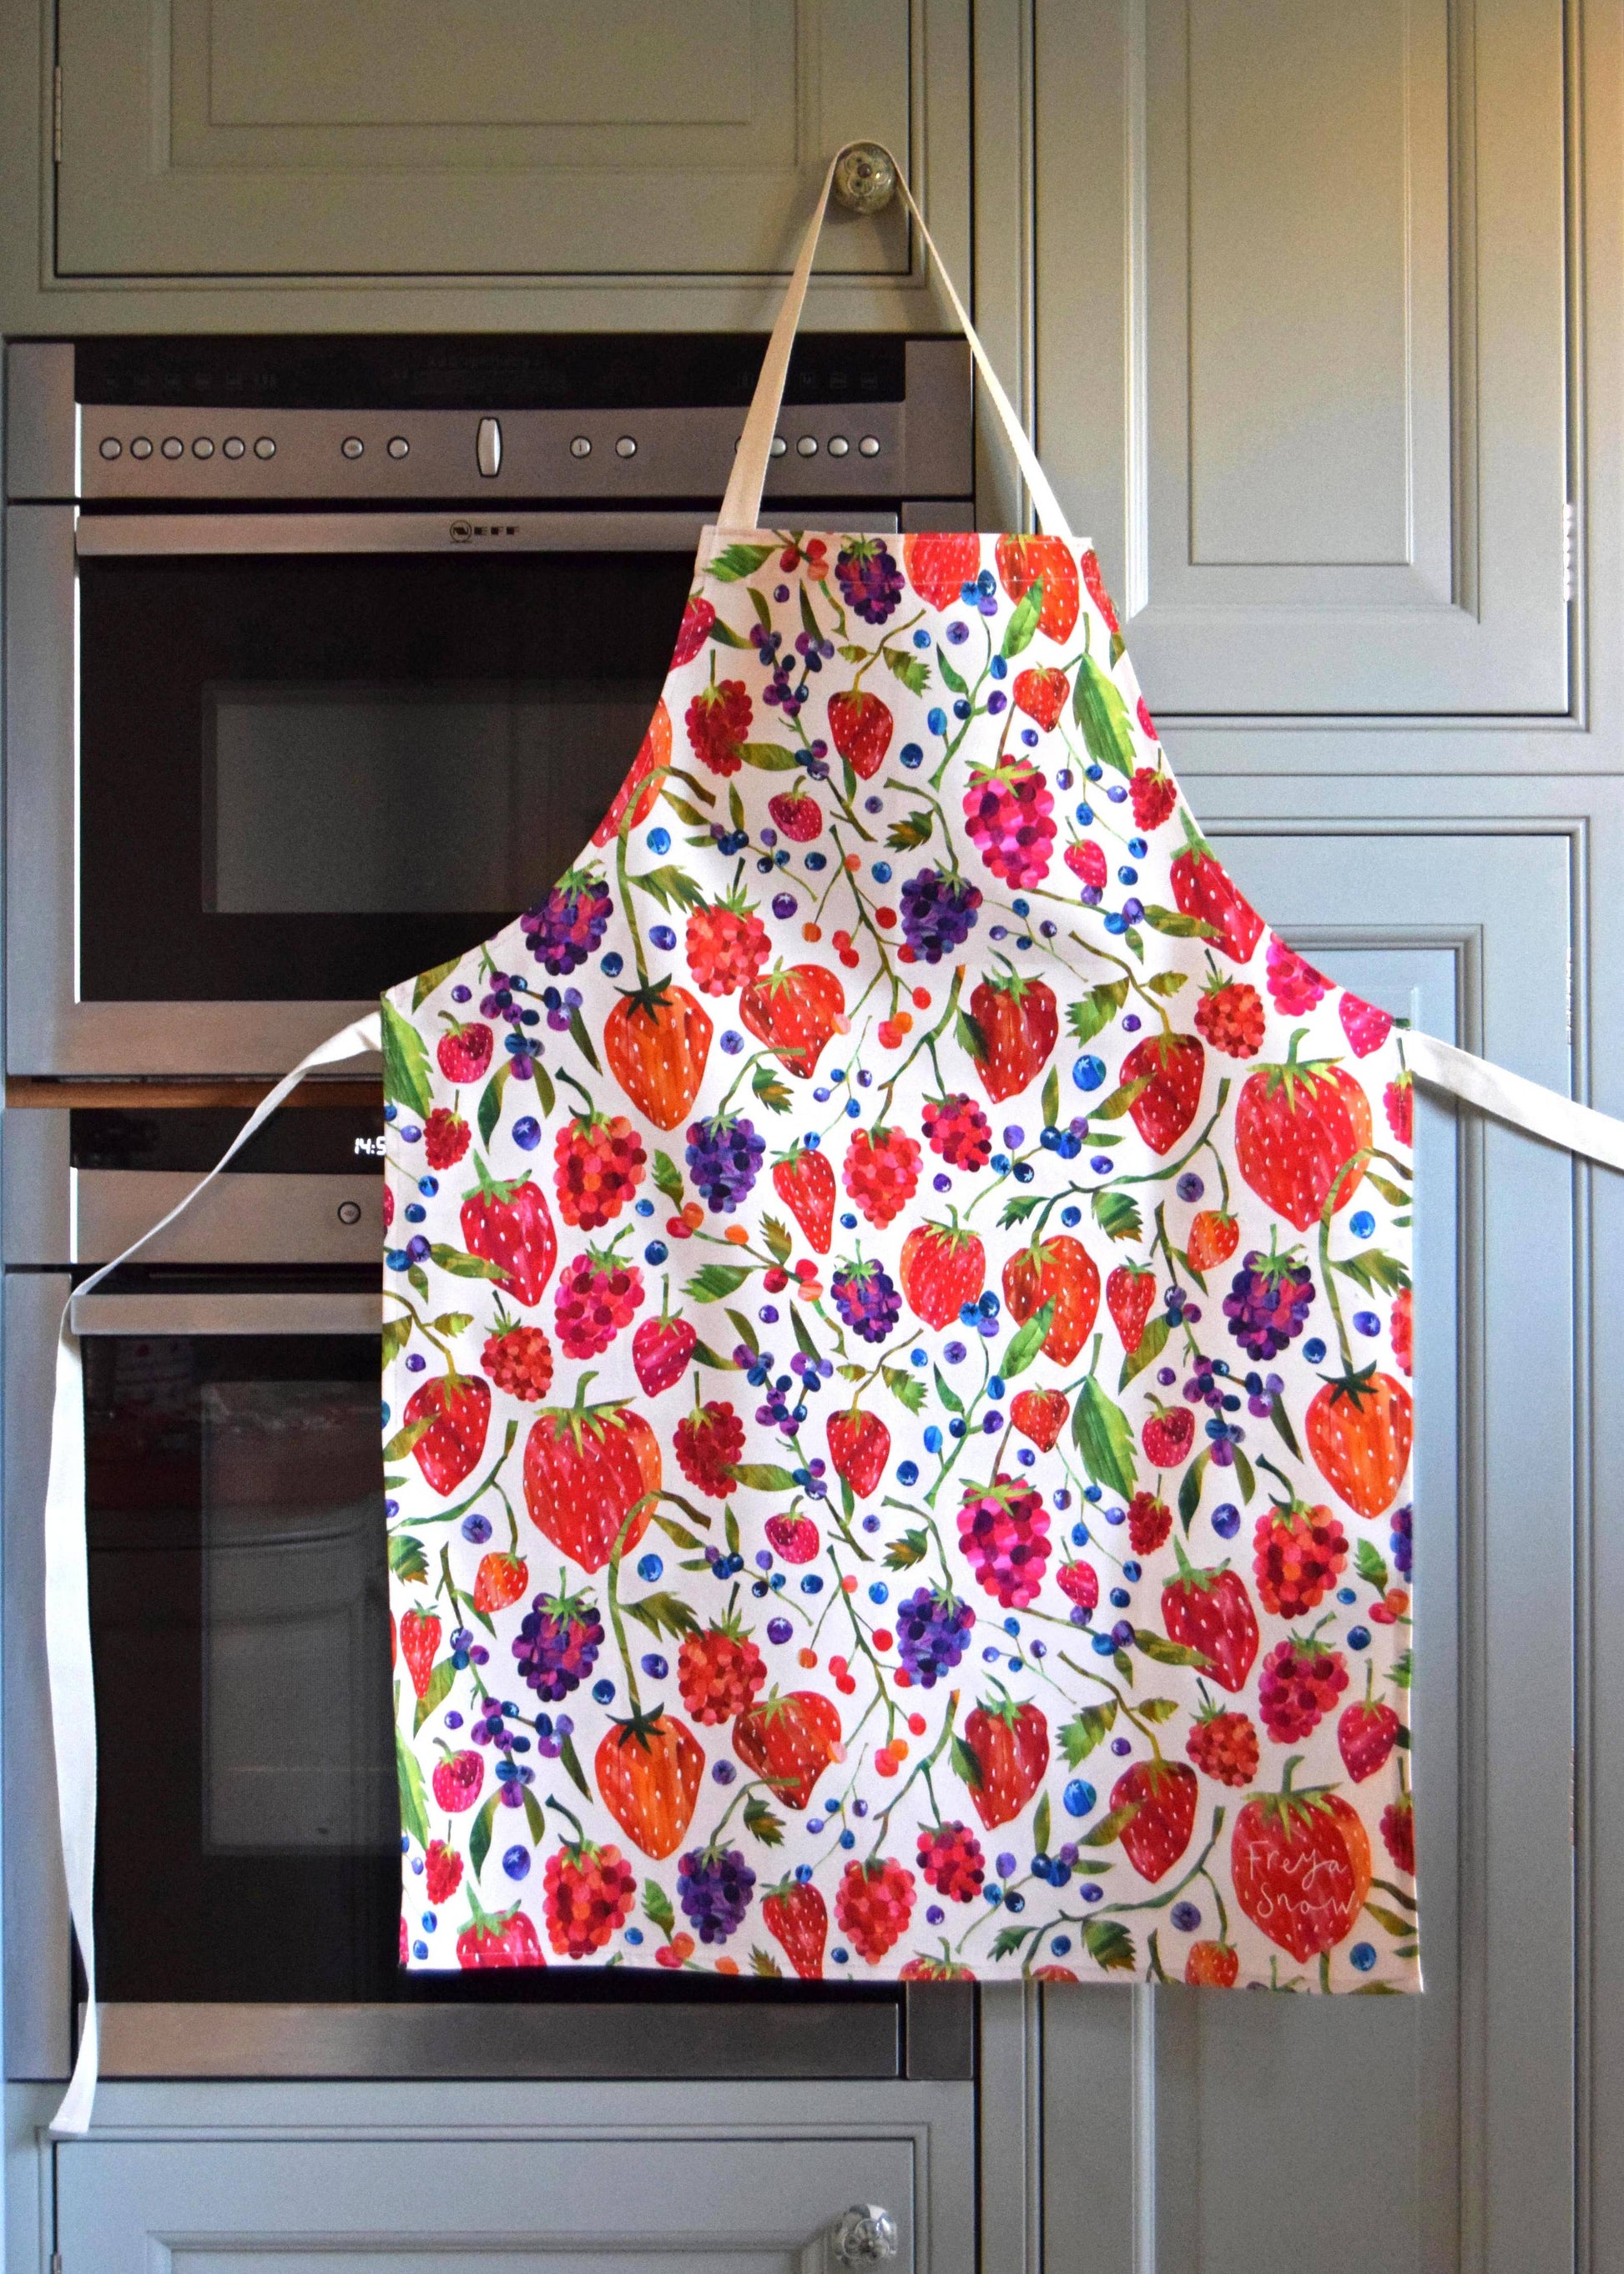 White apron designed with different berries